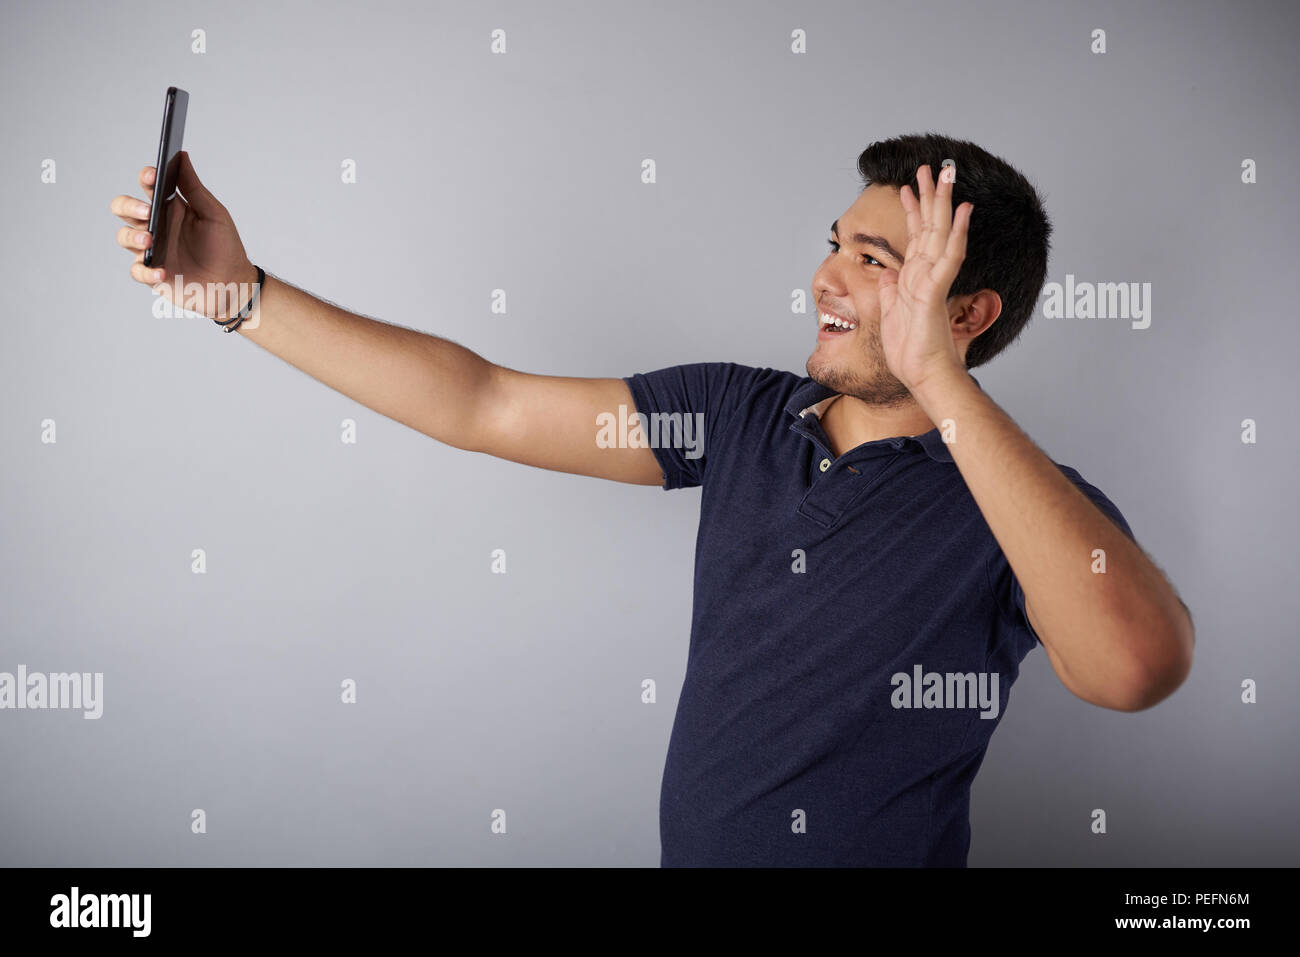 Young man wave hand into videop call in studio background Stock Photo